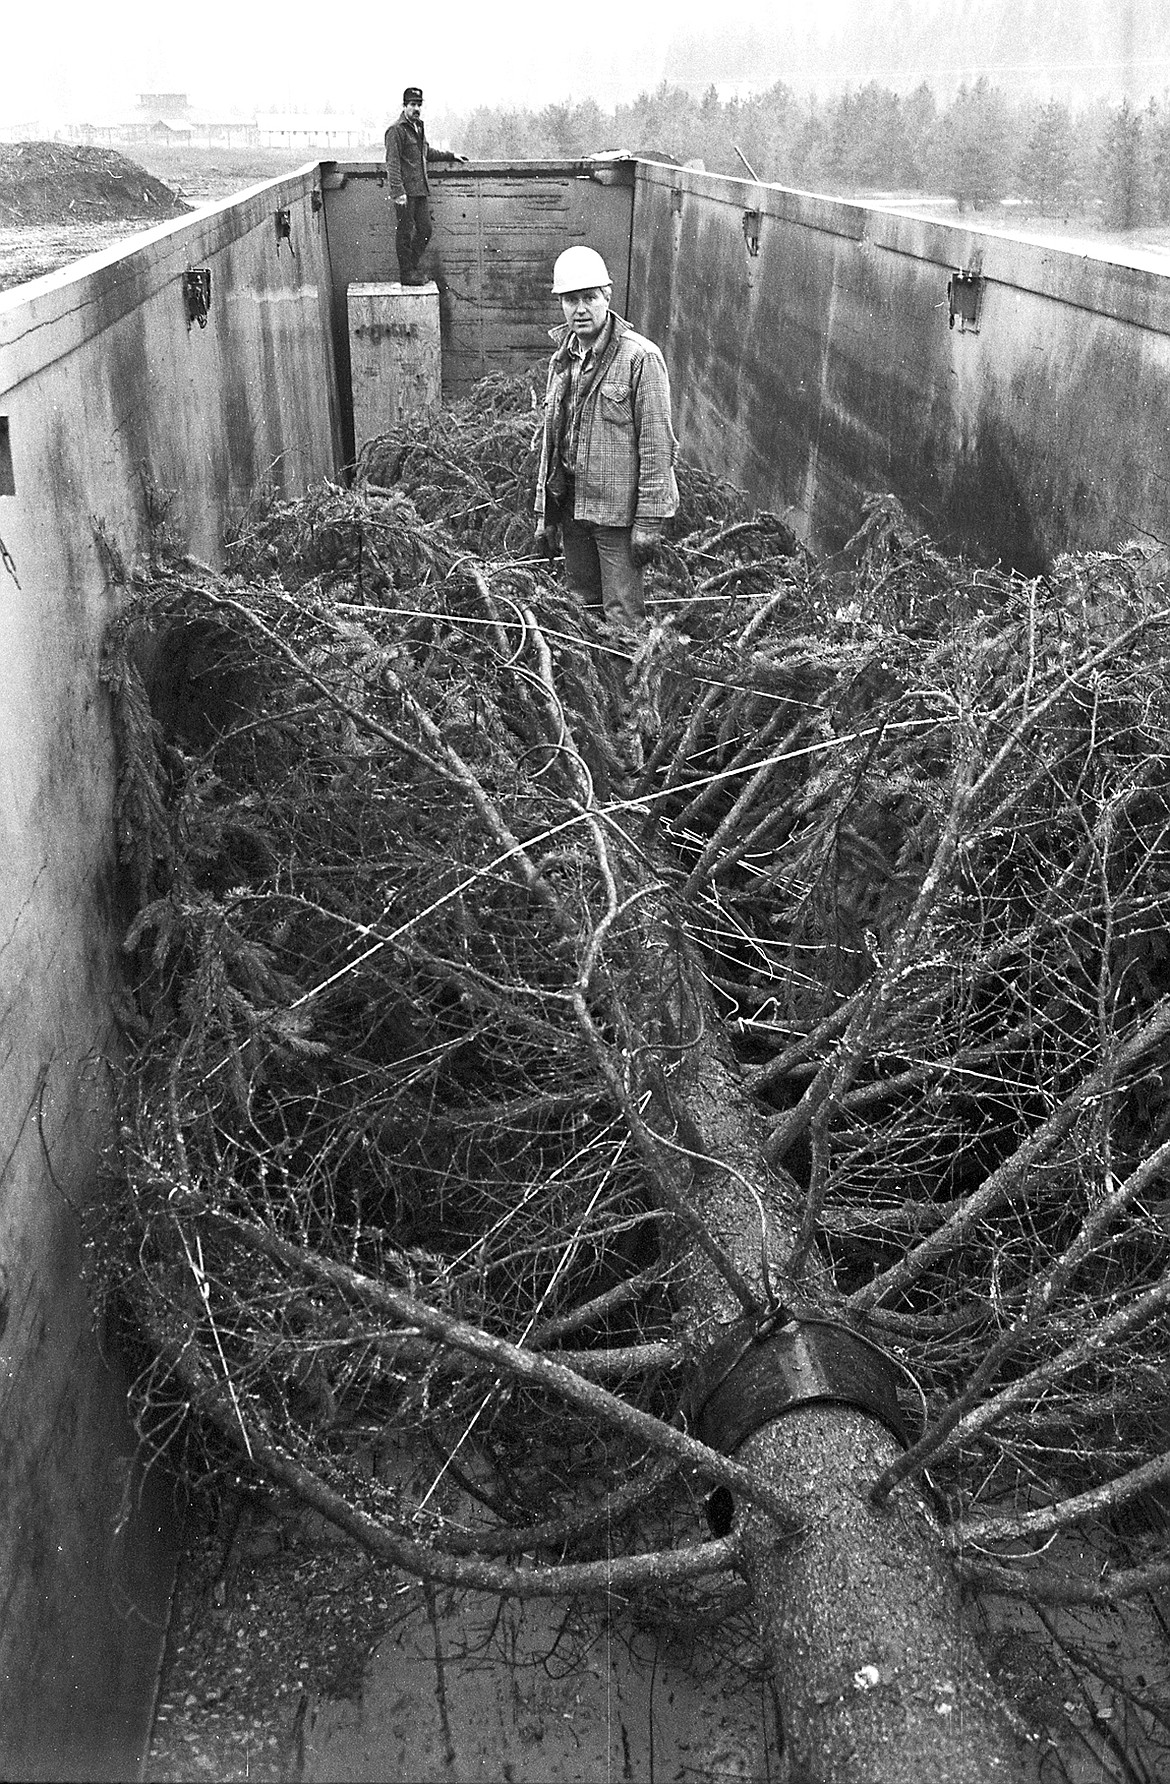 Jim Simpson of Champion International pauses in his last checkup of the 65-foot 1989 Capitol Christmas Tree as it rests inside the boxcar which will carry it to Washington. From the Nov. 22, 1989 files of The Western News.